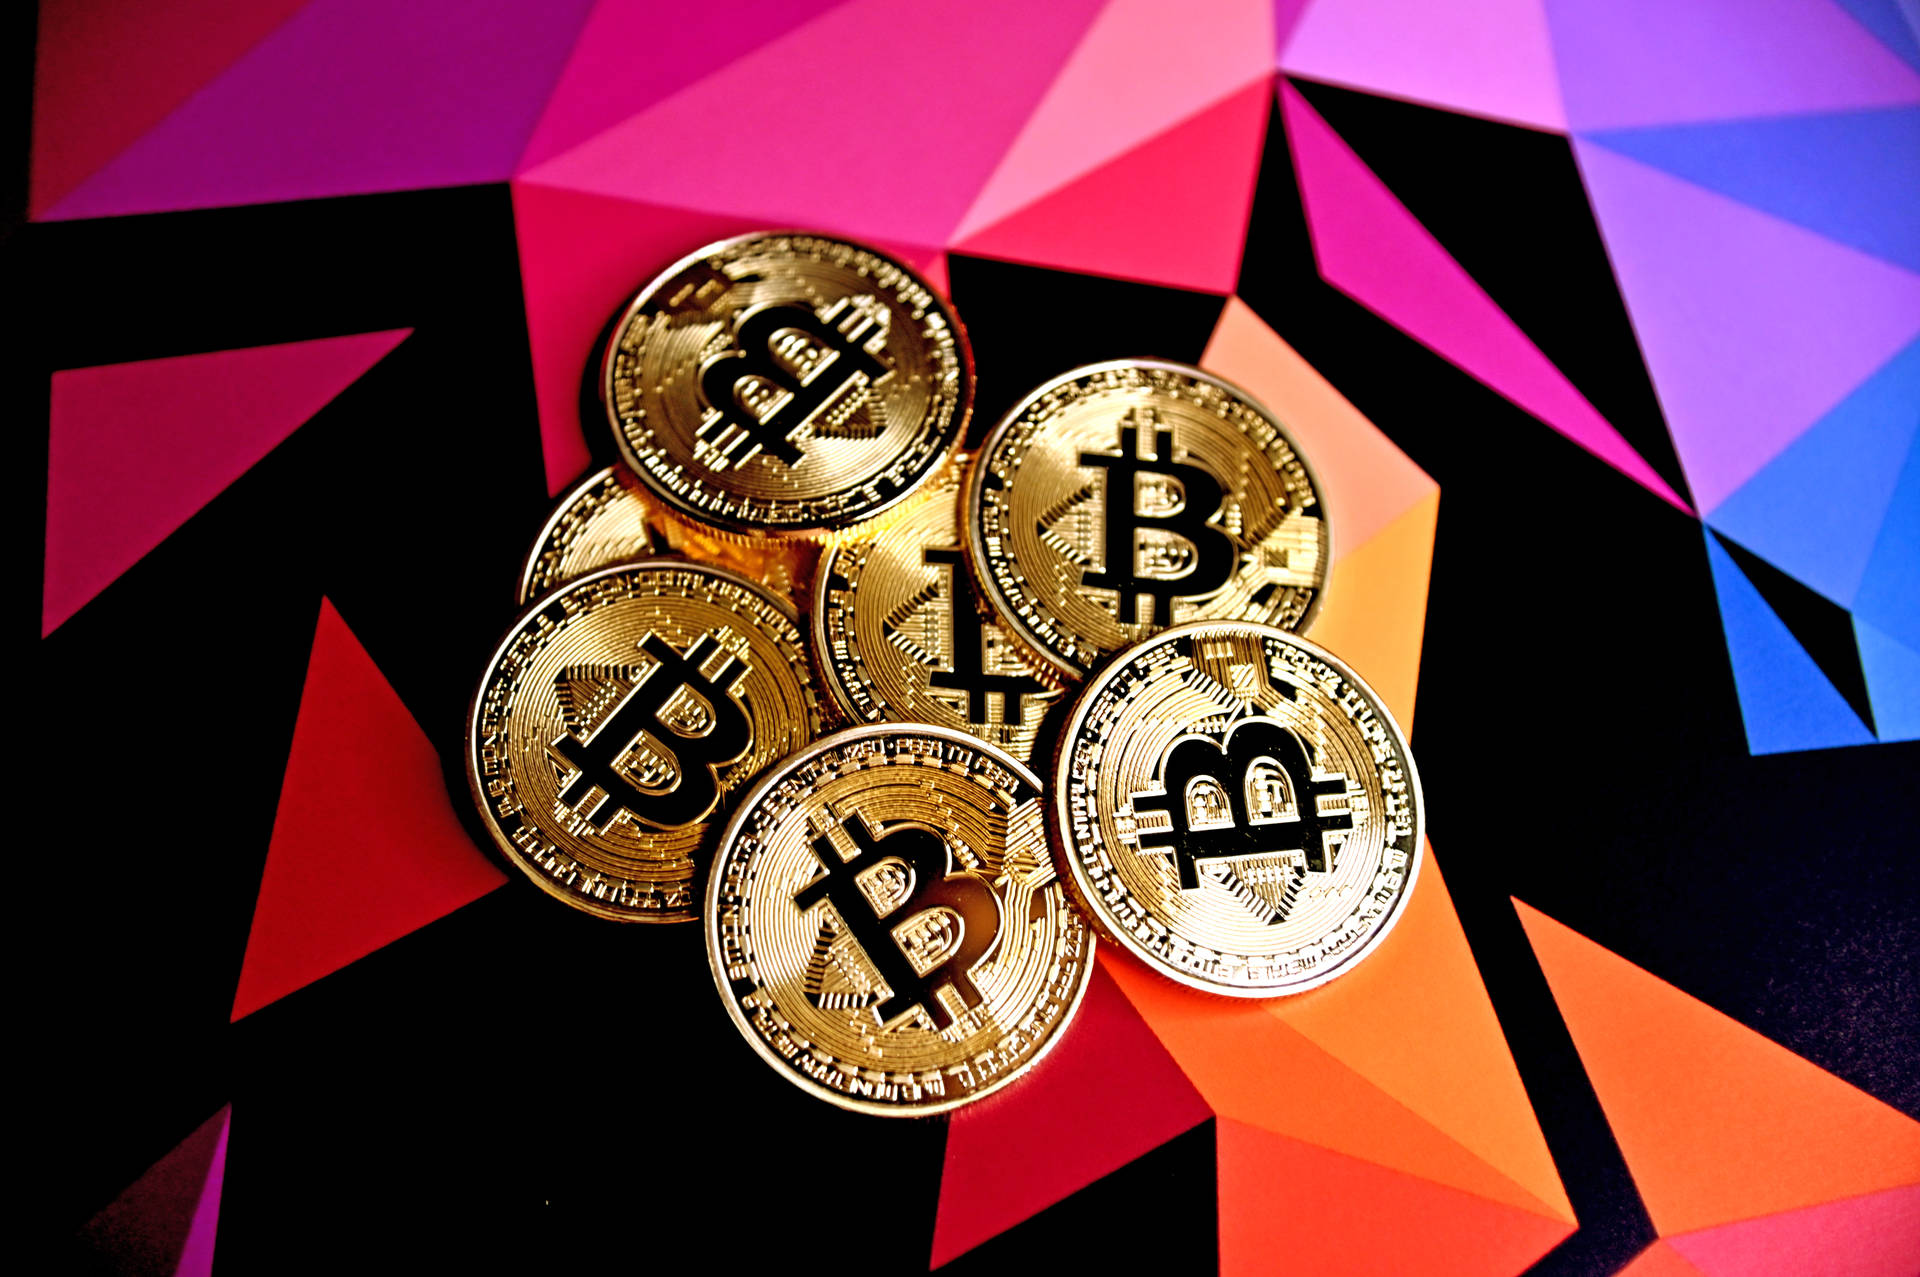 6048X4024 Bitcoin Wallpaper and Background